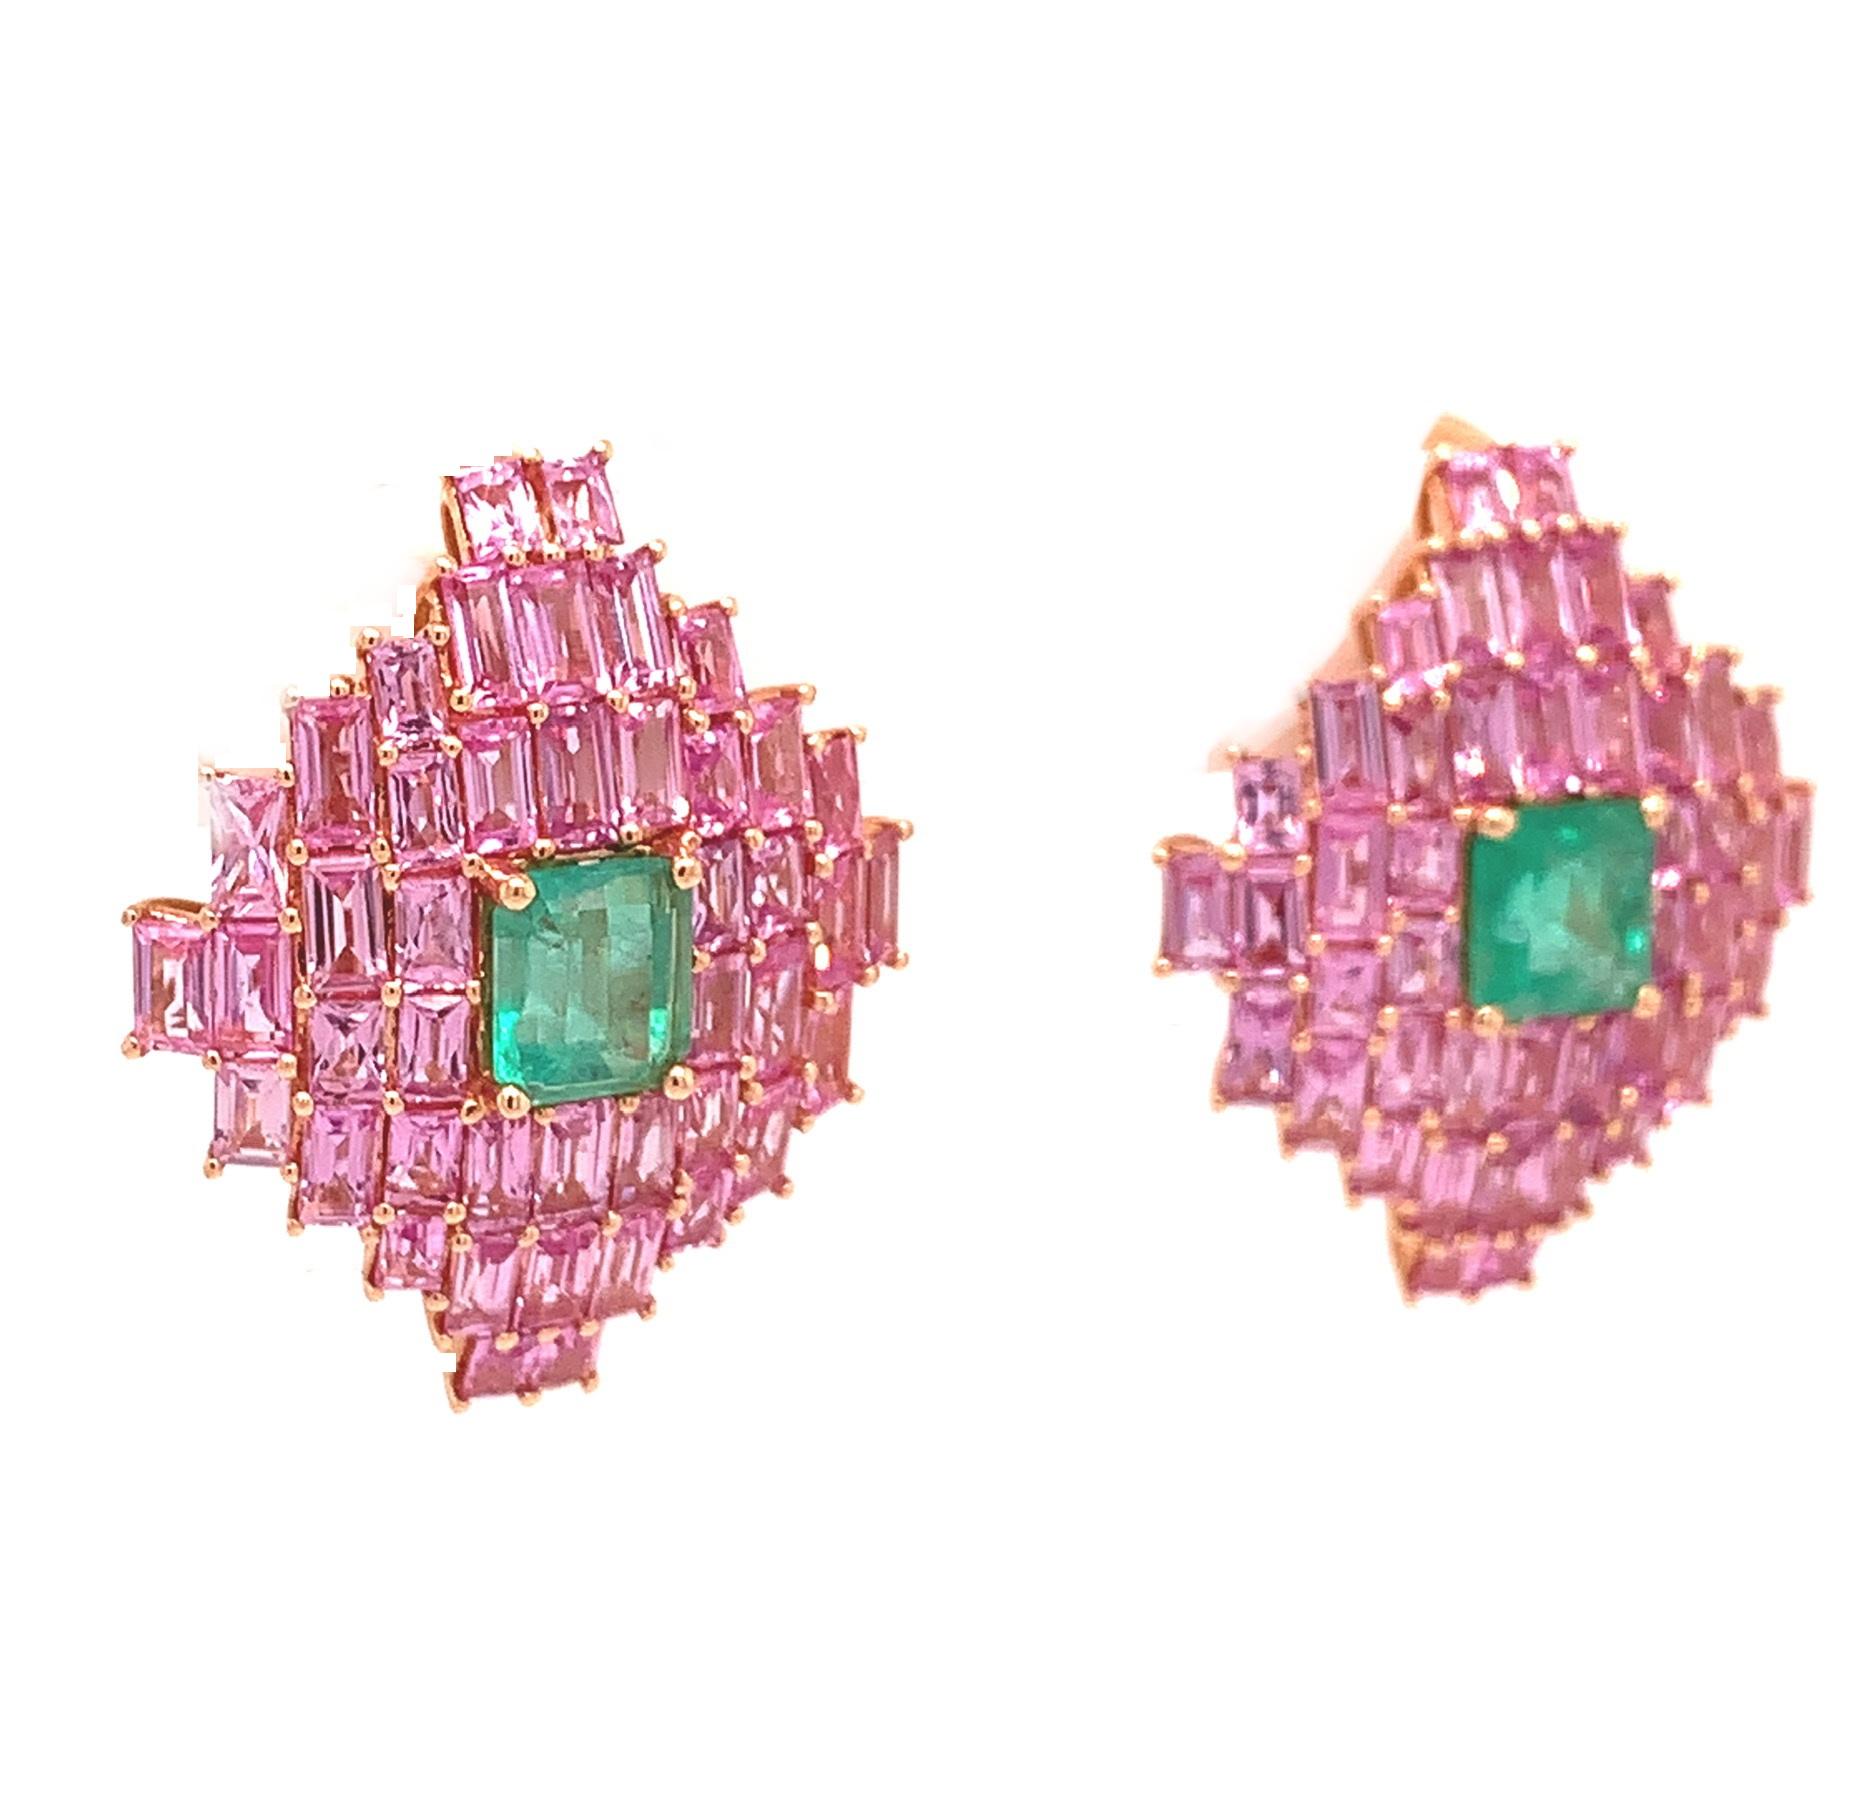 18K Rose Gold
Pink Sapphire: 7.74ct total weight.
Emerald: 1.92ct total weight.